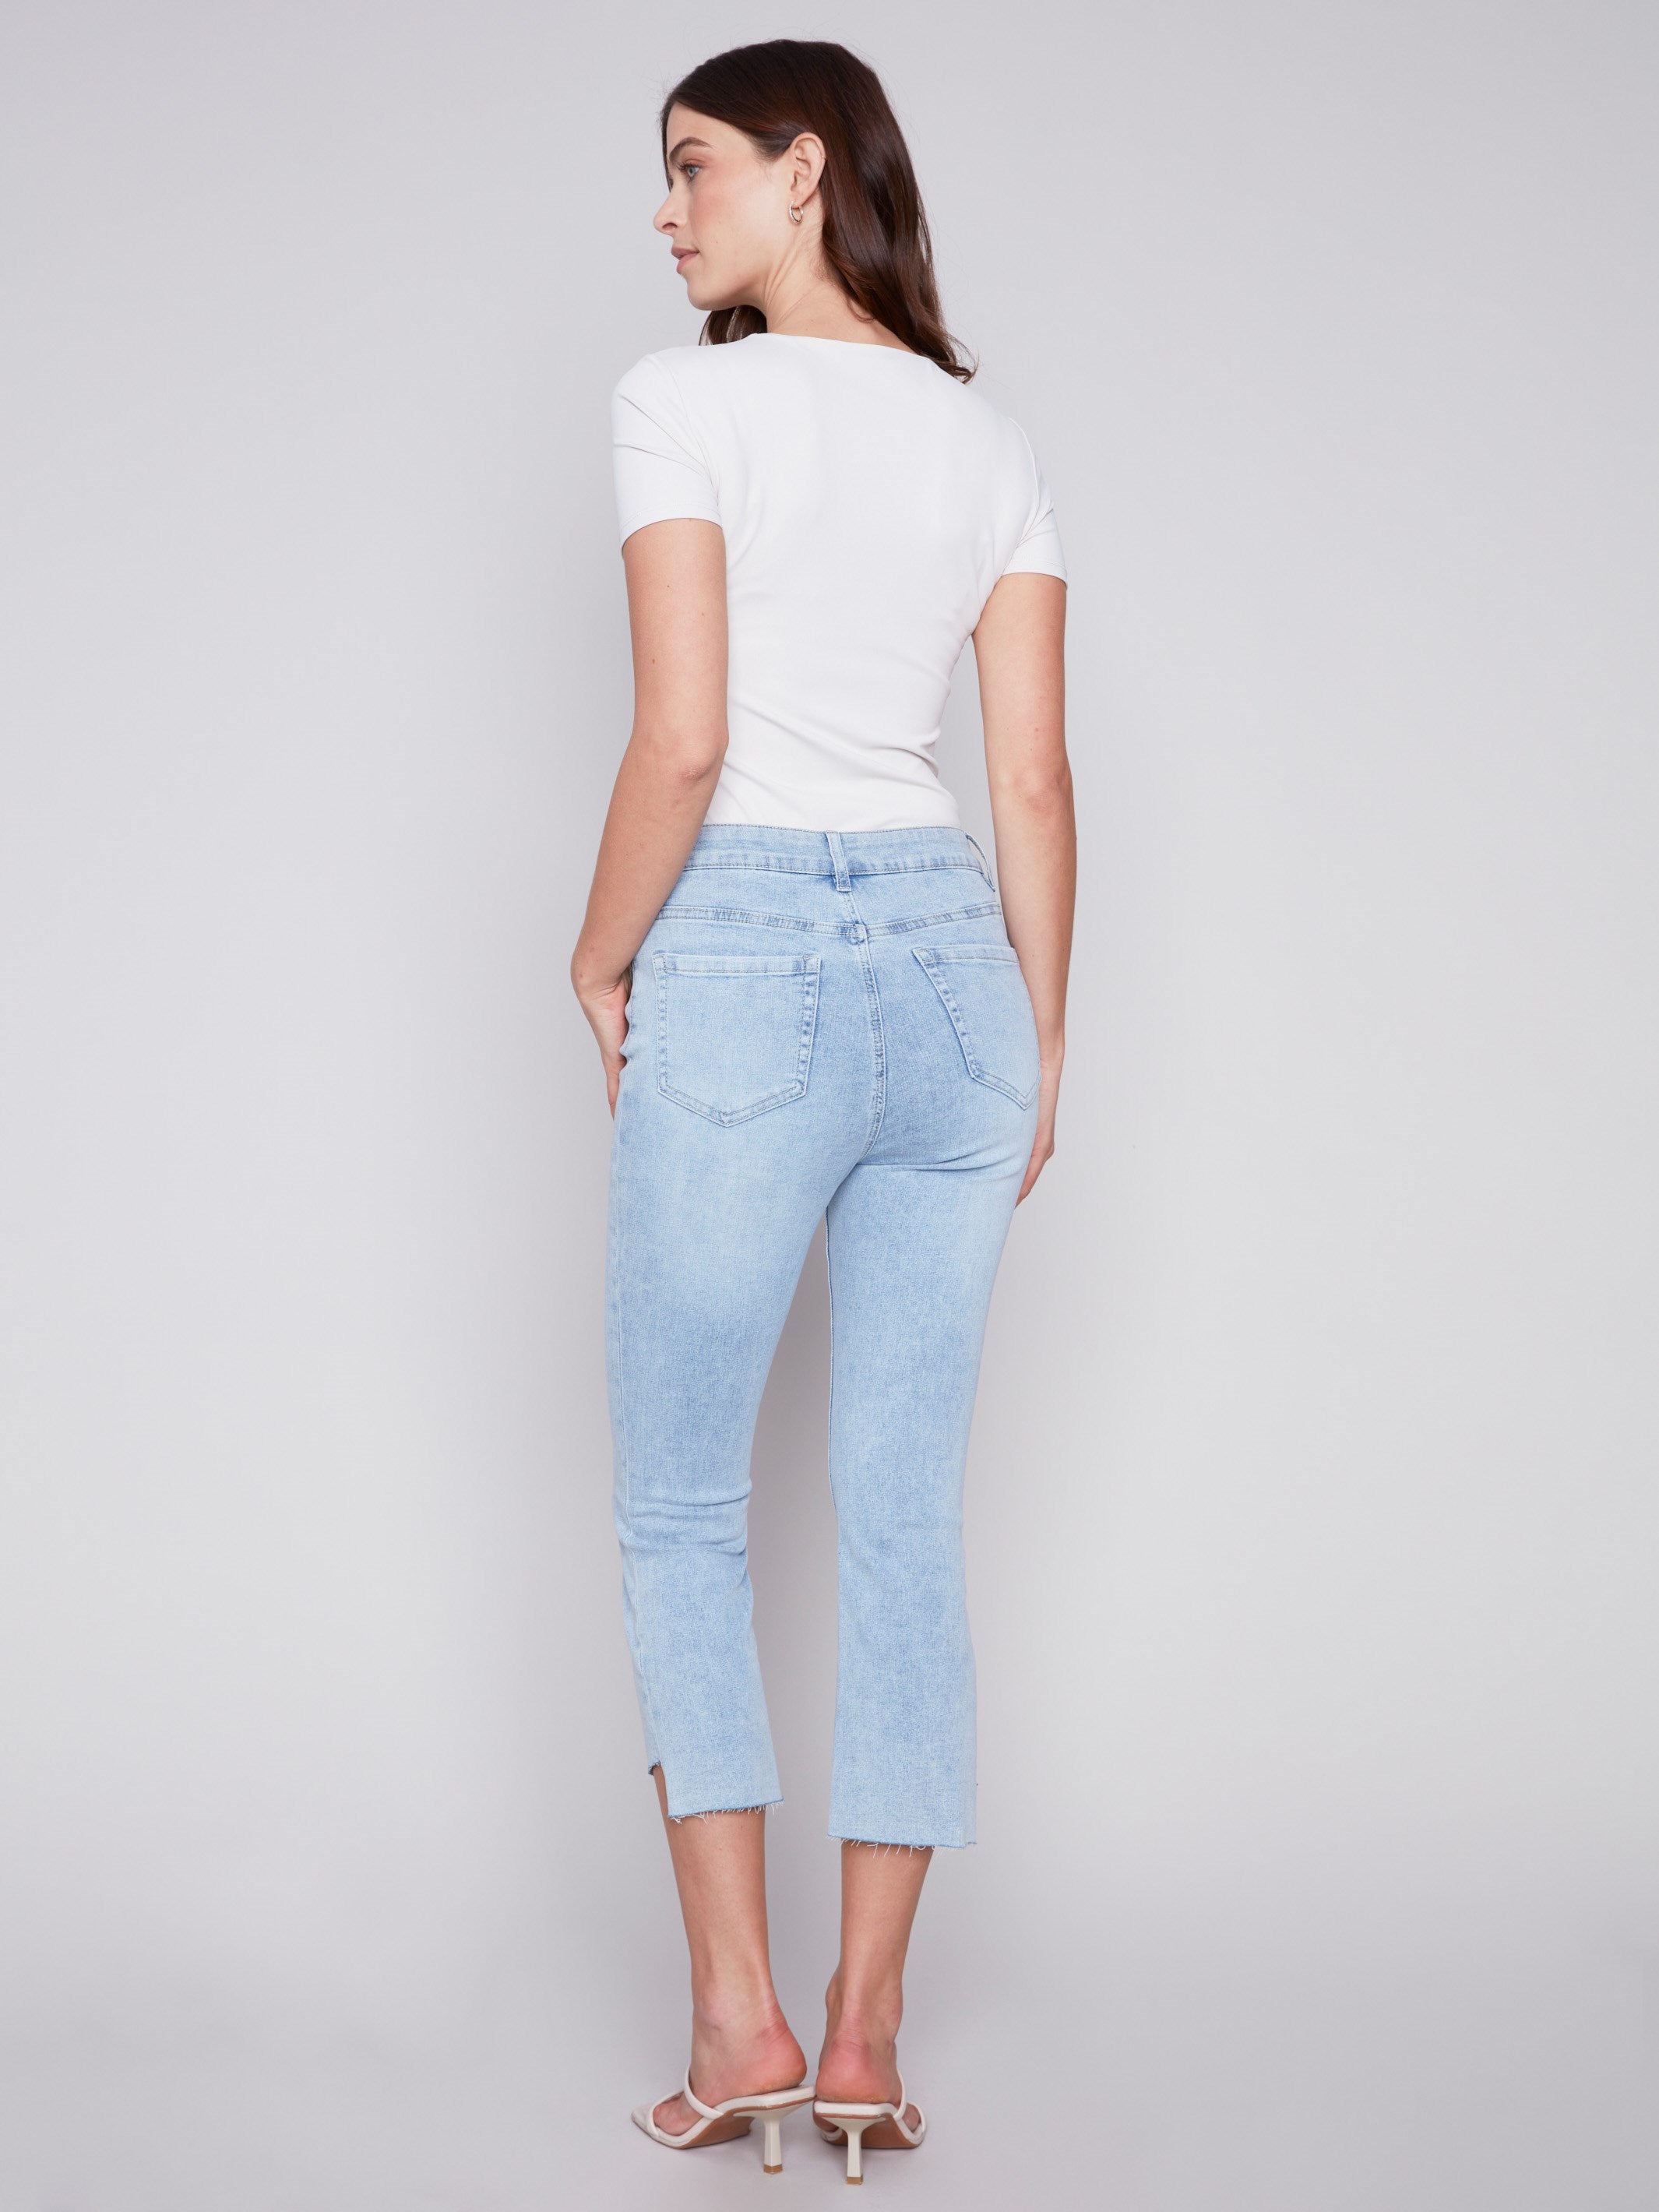 Charlie B Cropped Bootcut Jeans with Asymmetrical Hem - Bleach Blue - Image 6